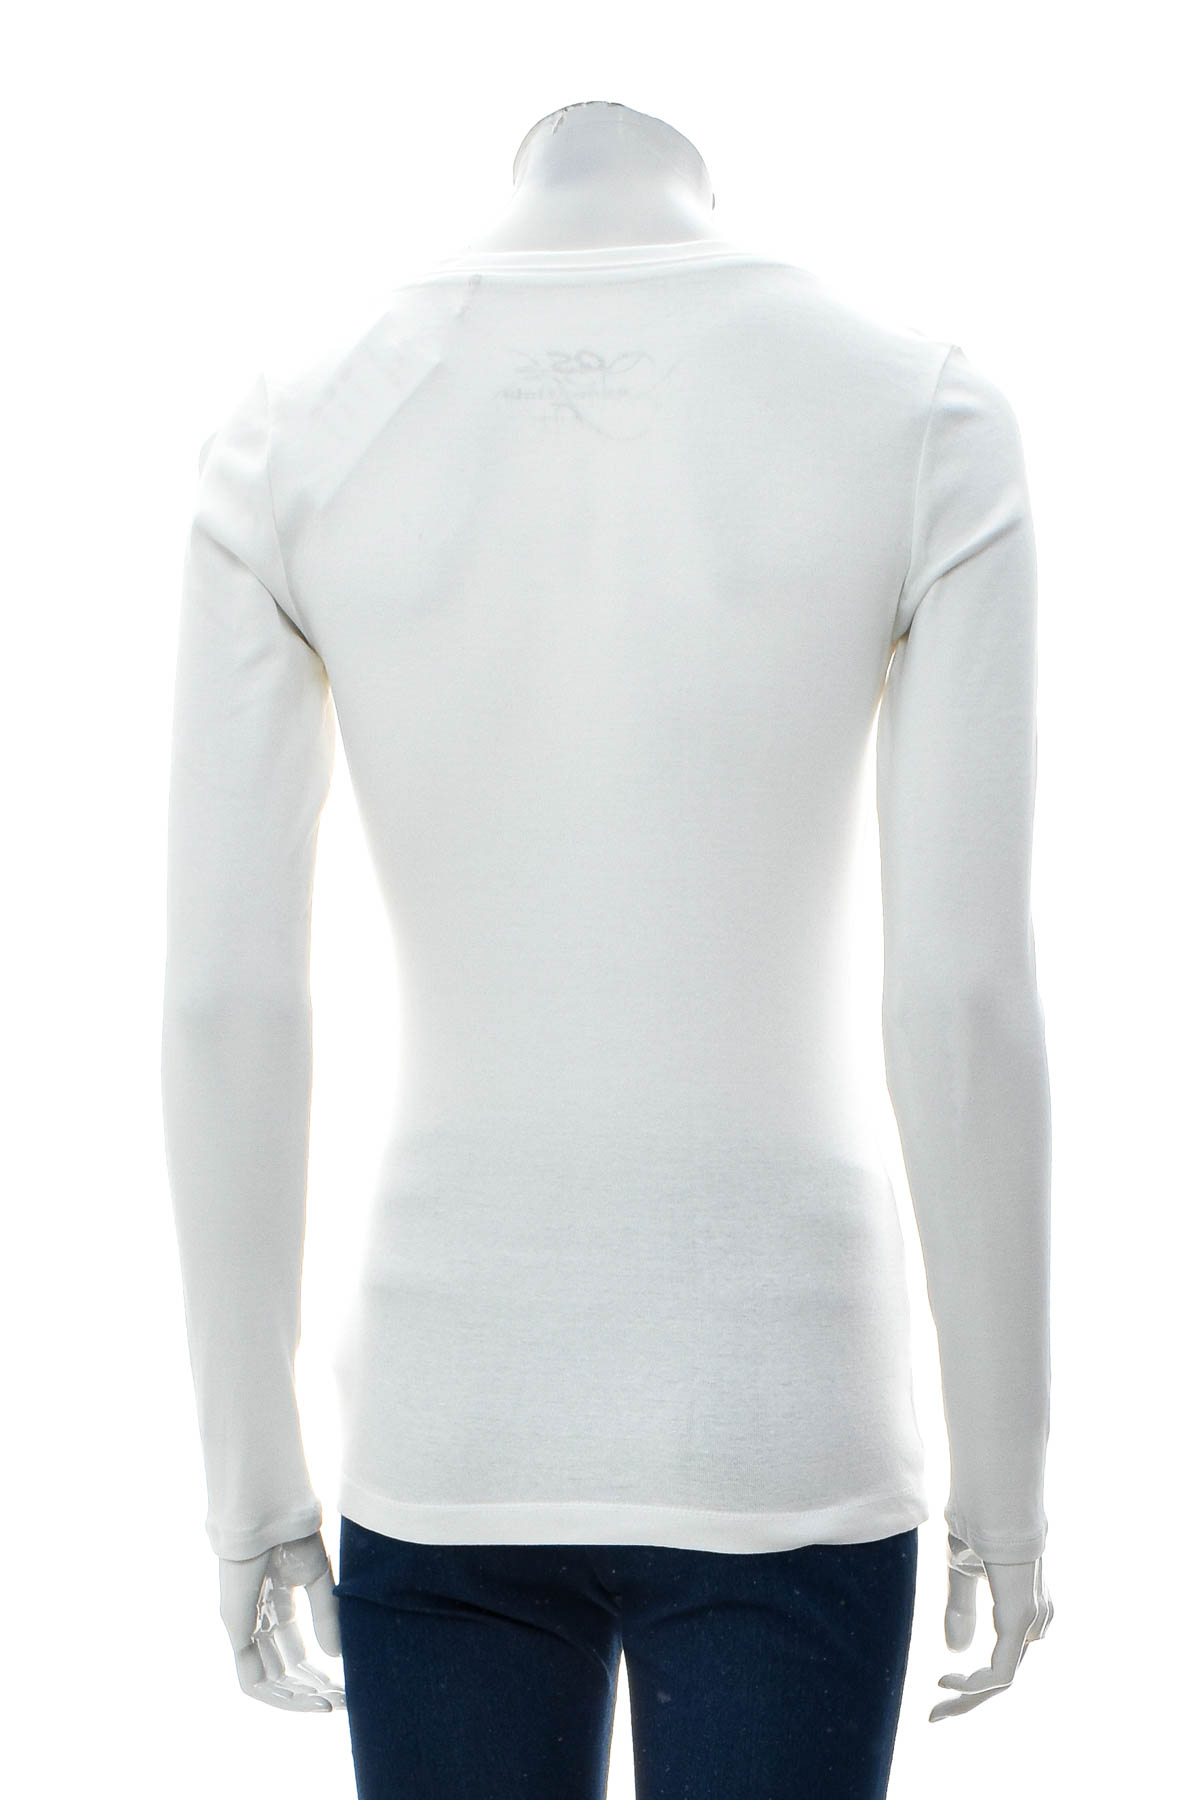 Women's blouse - QS by S.Oliver - 1